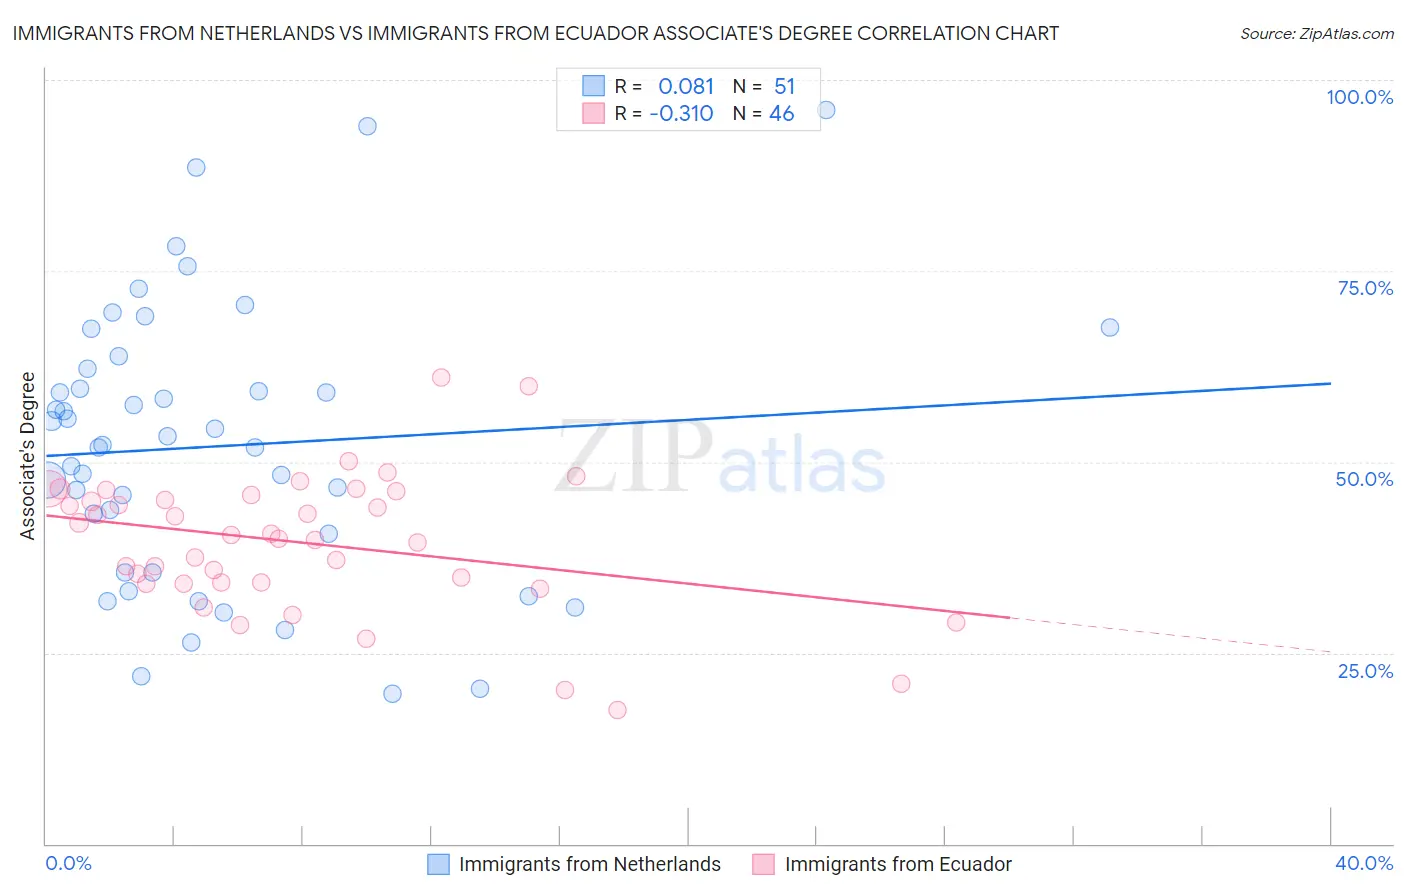 Immigrants from Netherlands vs Immigrants from Ecuador Associate's Degree